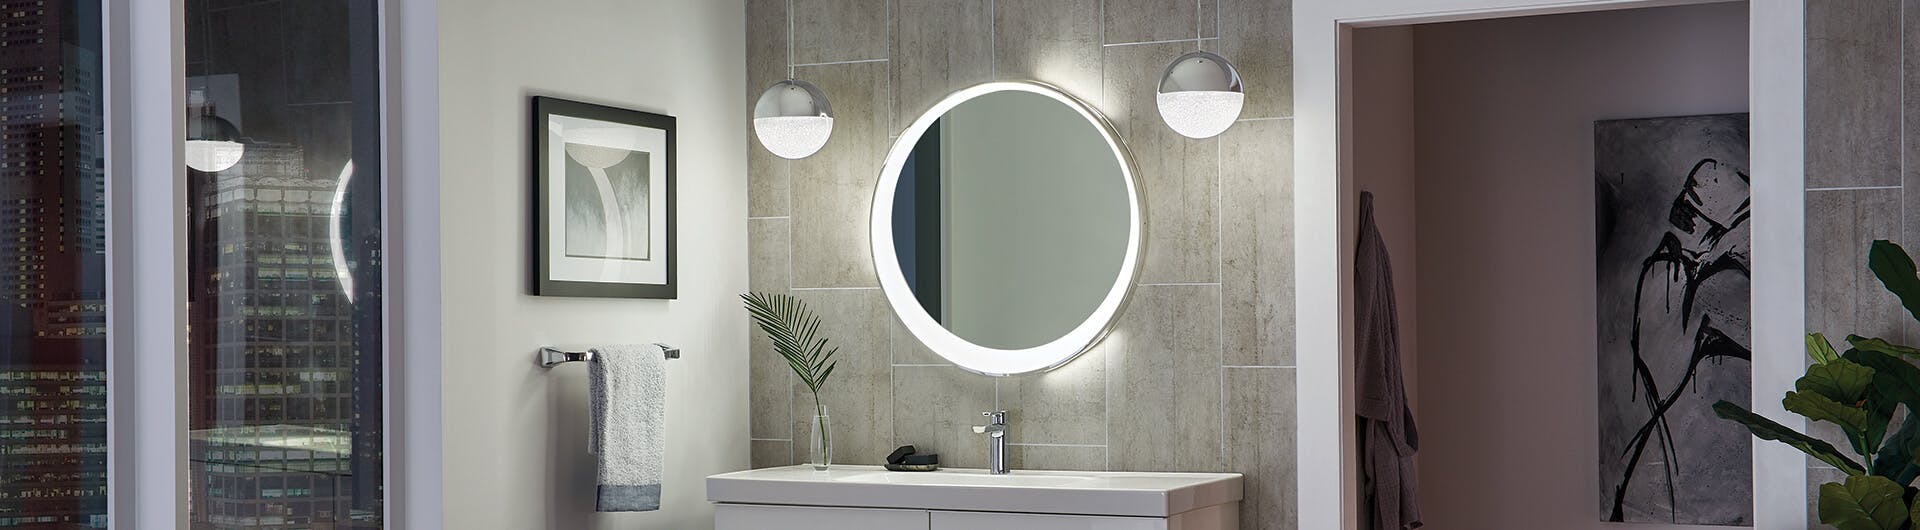 A bathroom at night with an offset round lighted mirror and two chome Moonlit pendants glowing in the center of the room